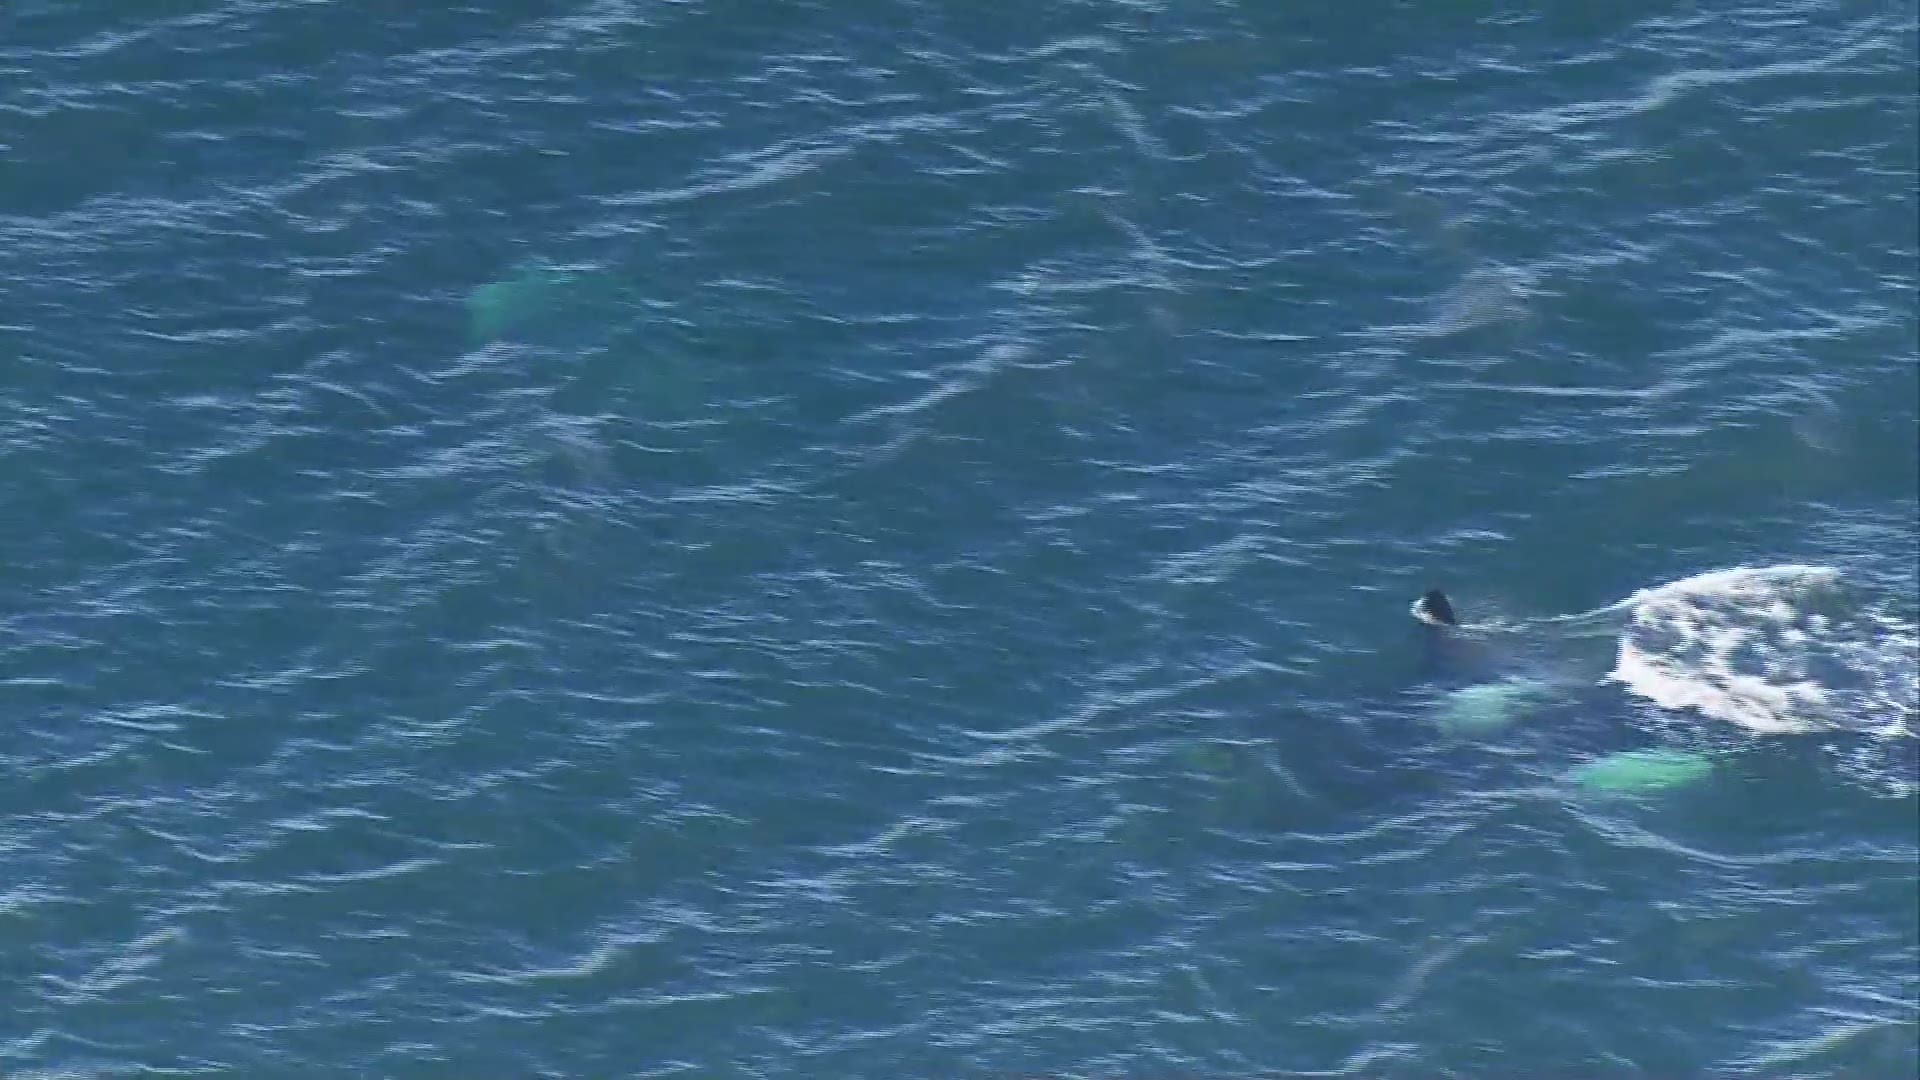 Baby orca spotted with pod near Fauntleroy ferry terminal in West Seattle on Tuesday, April 9, 2019